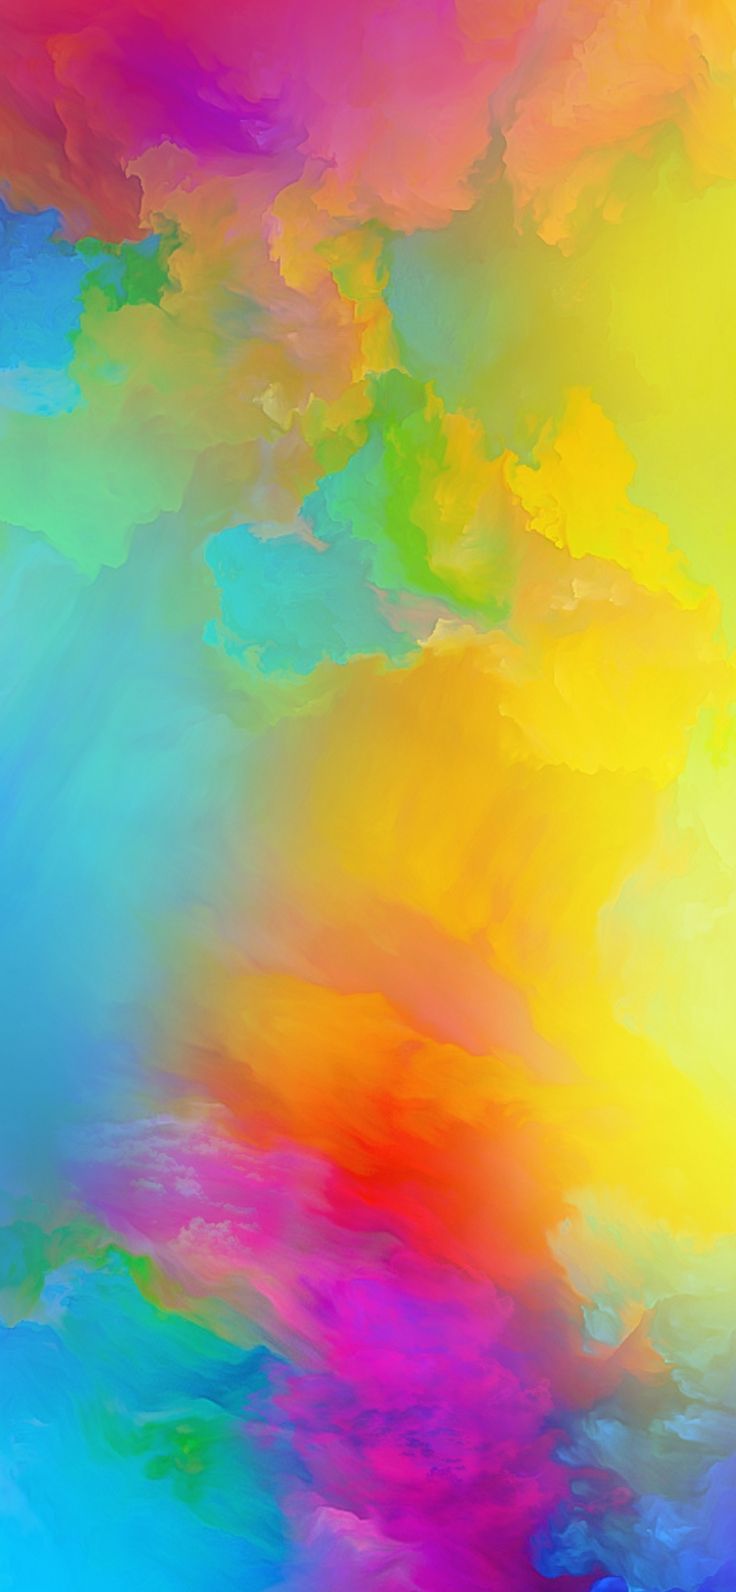 iPhone Xr Galaxy A70 Wallpaper 3 Its Preview Original size www